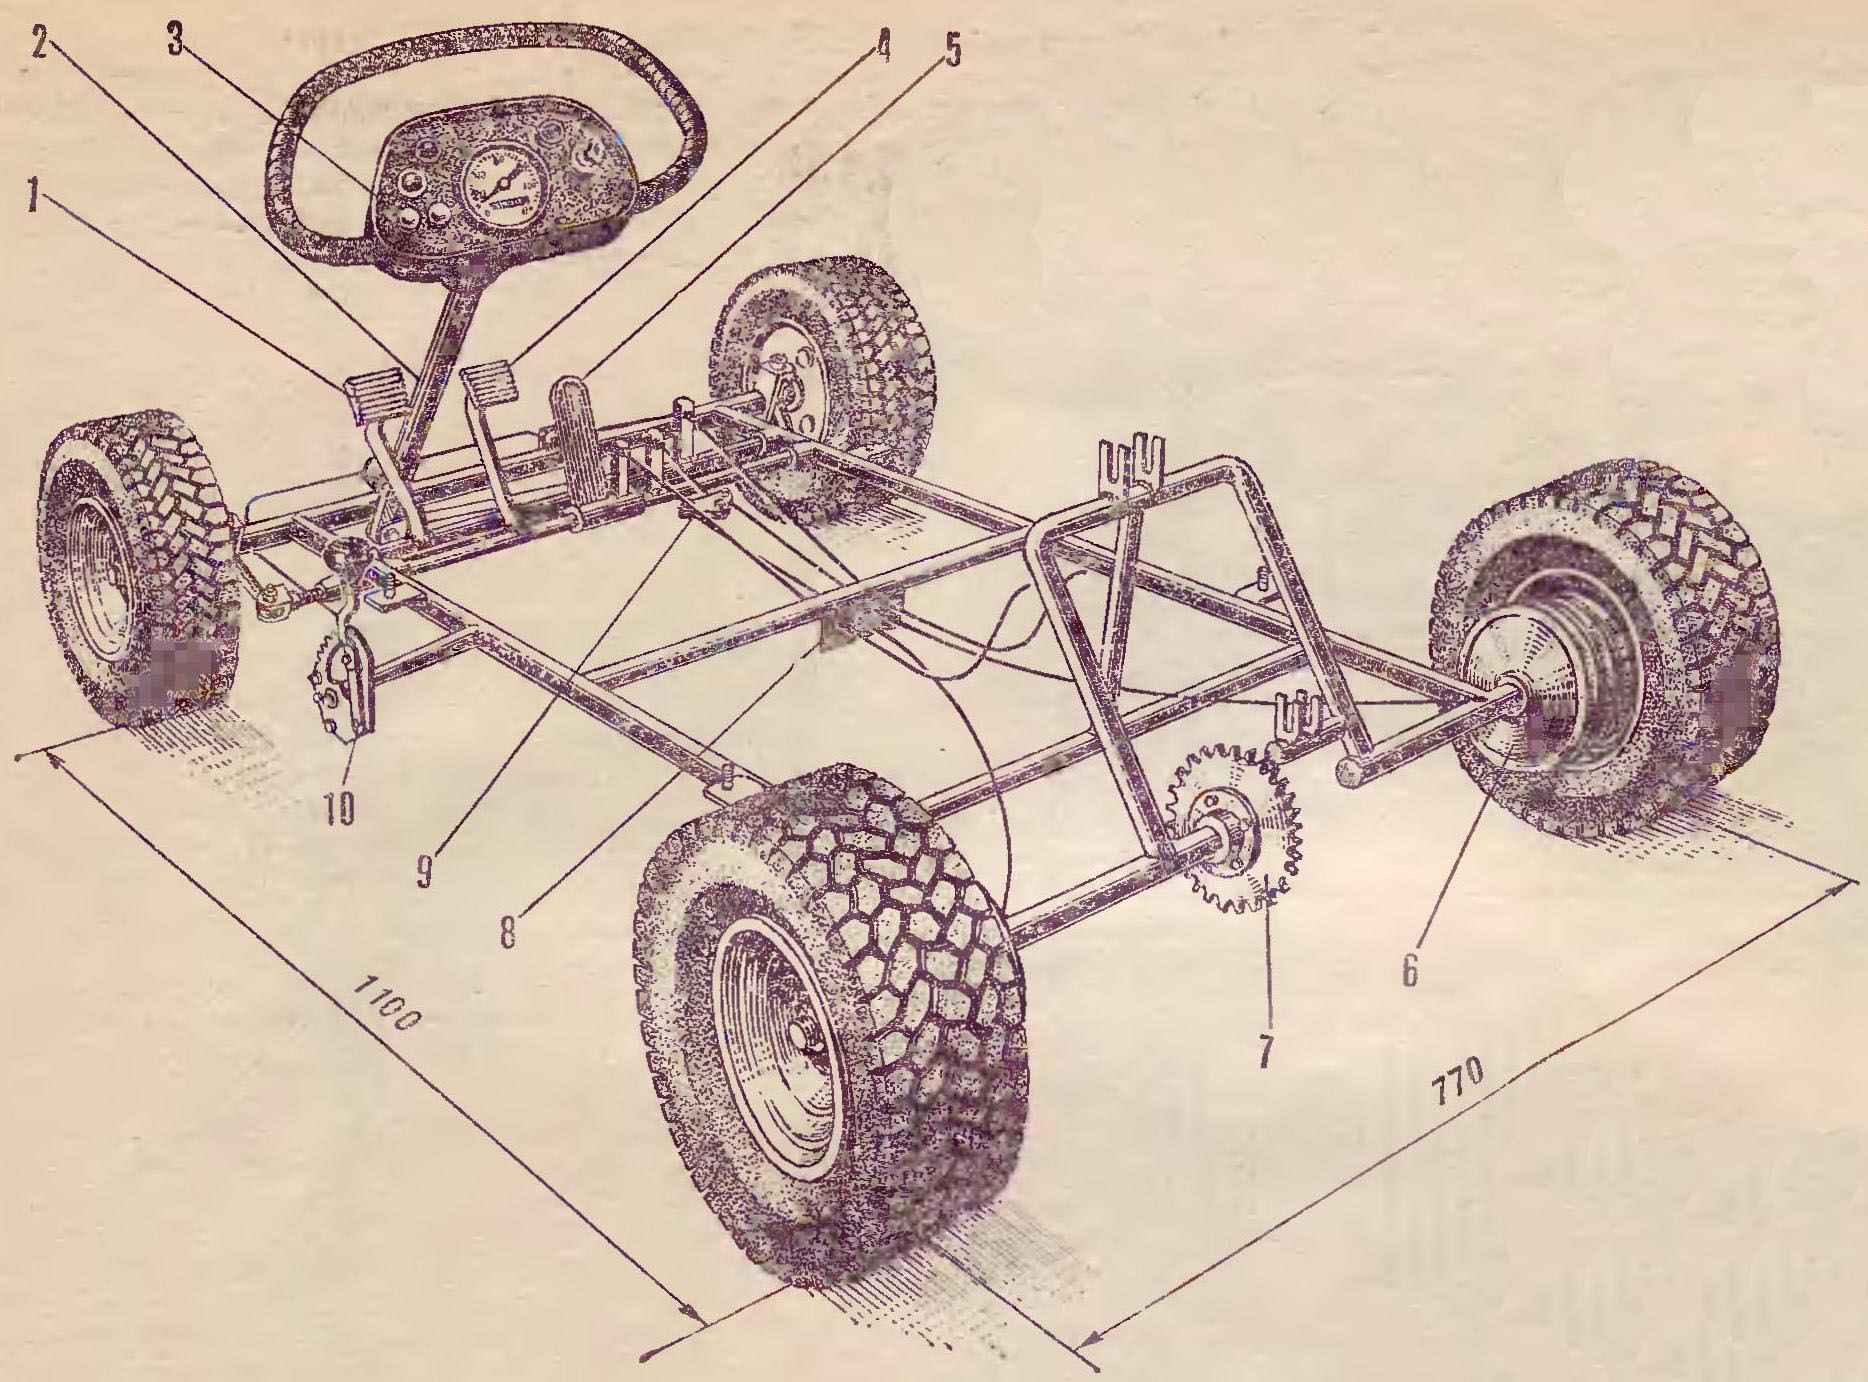 Fig. 2. The layout of the car